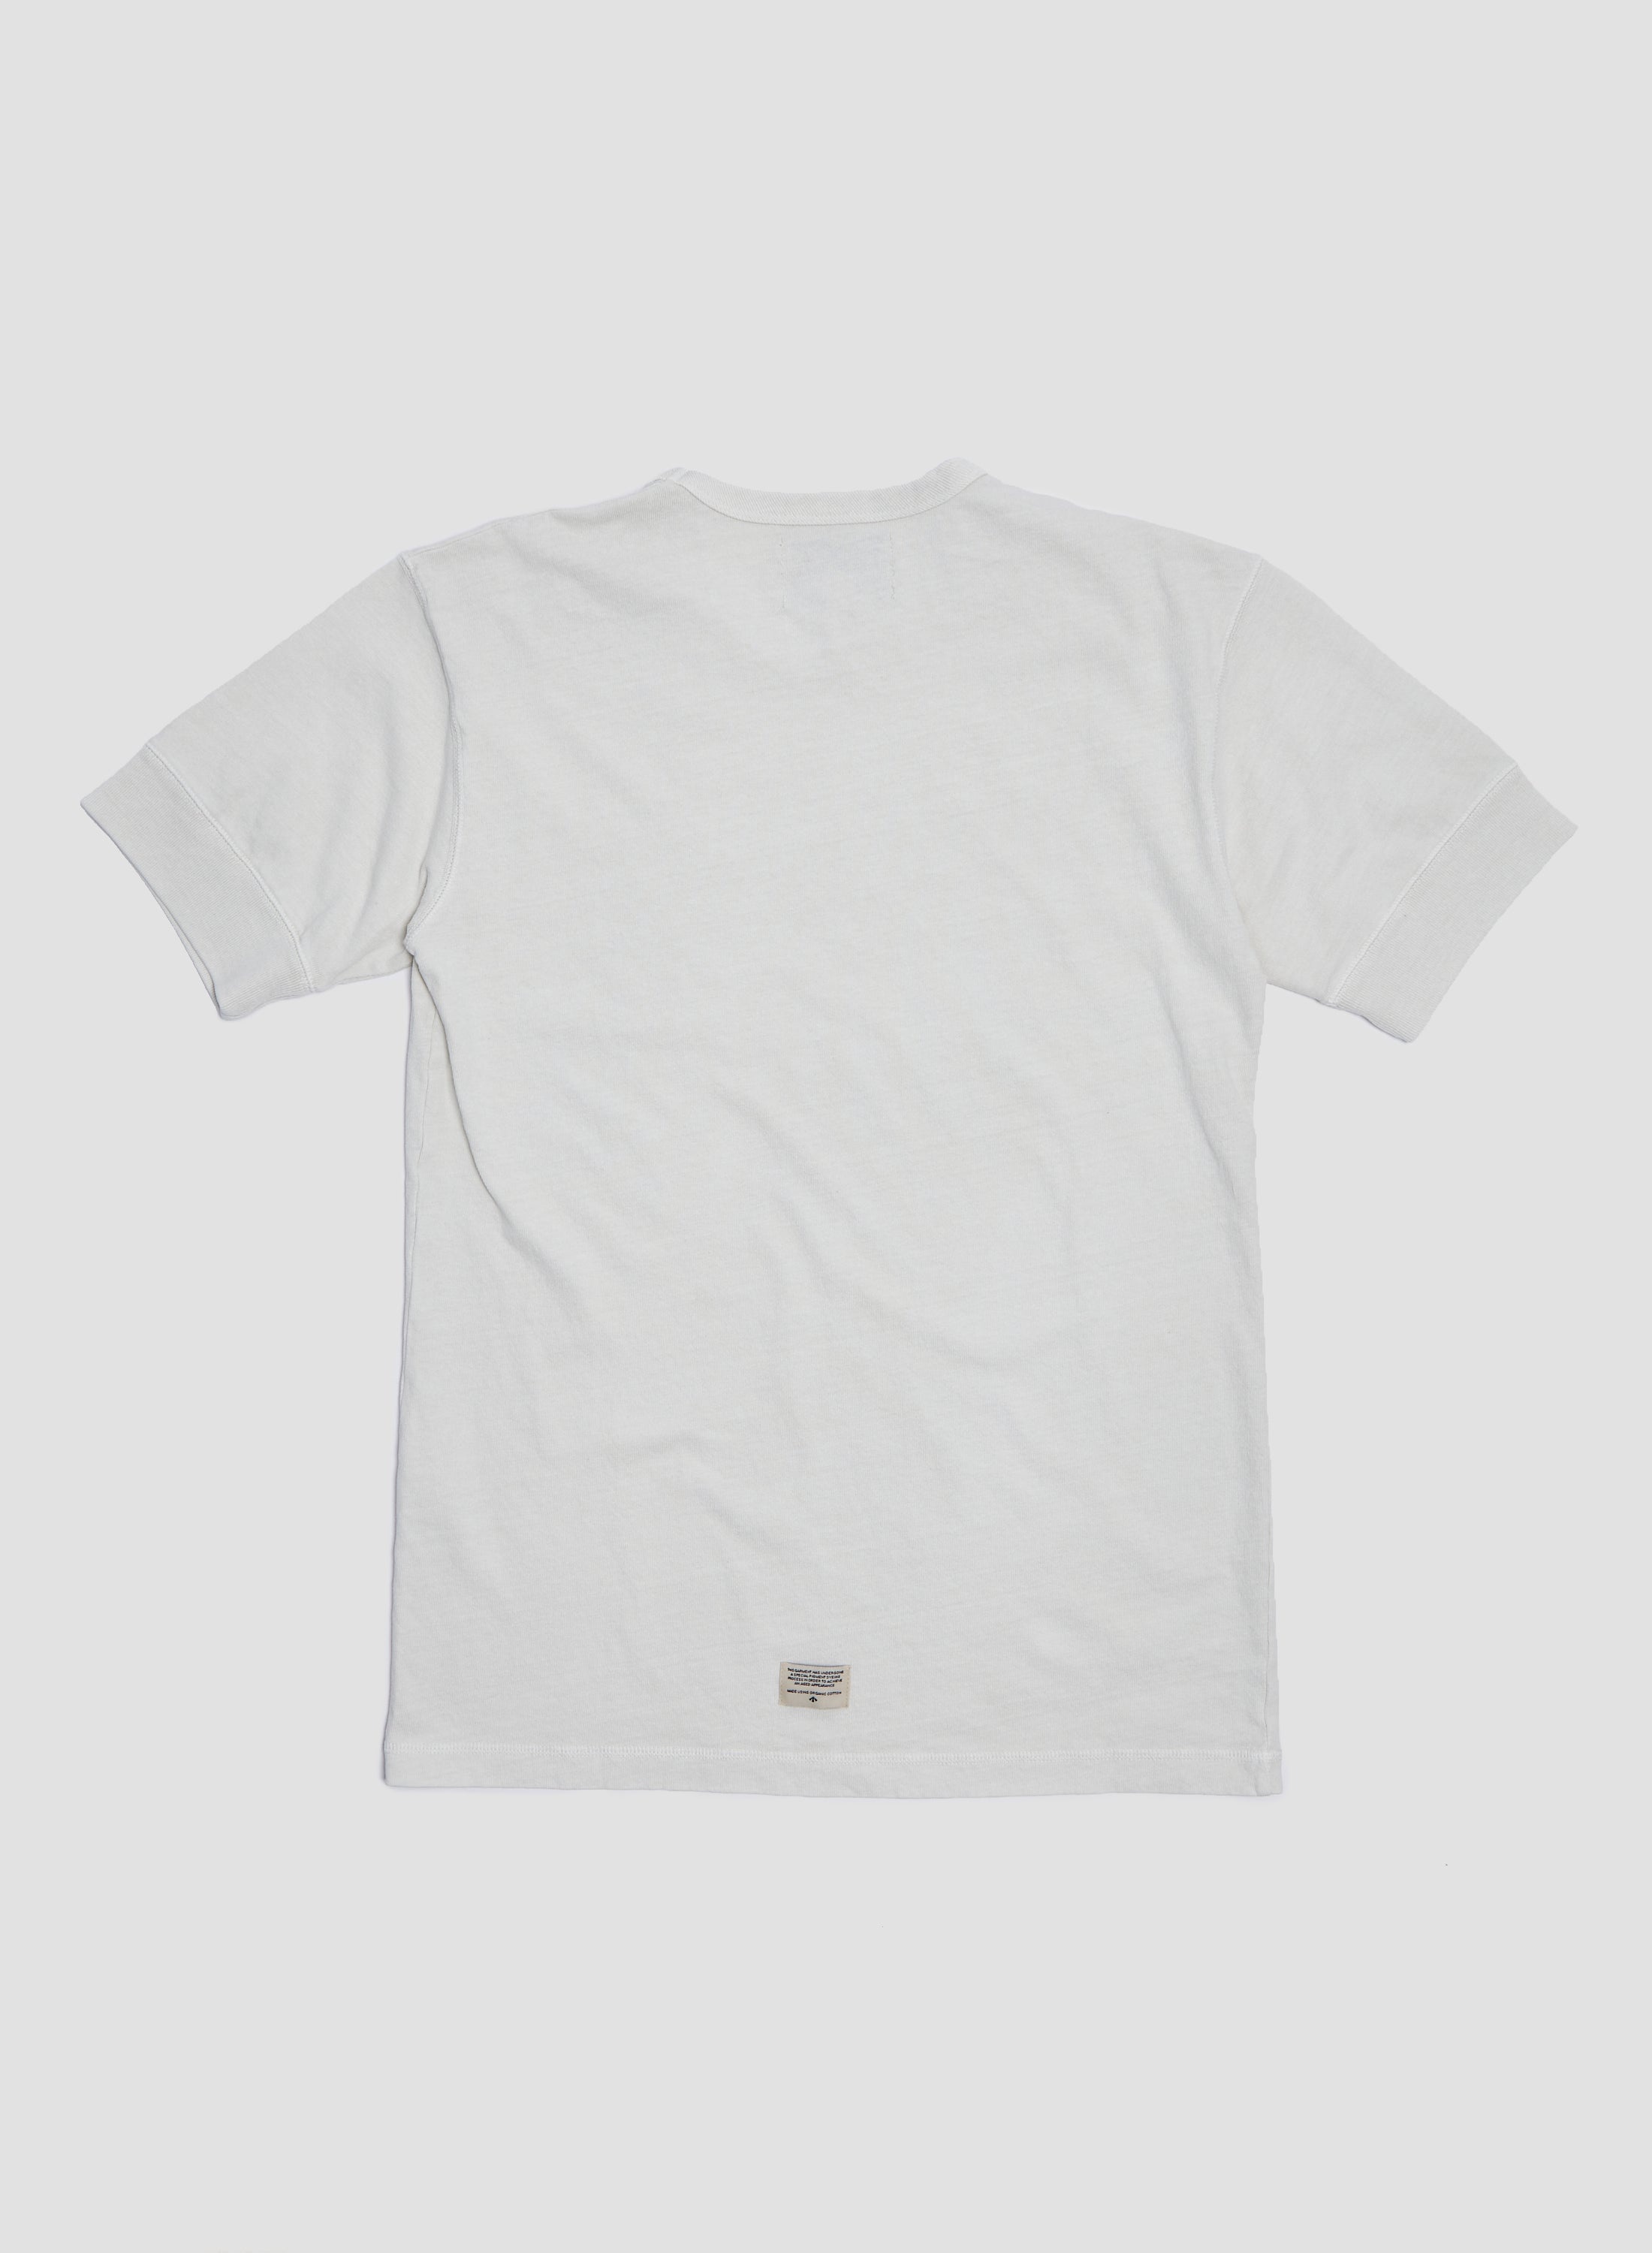 Military Tee in Natural - 4